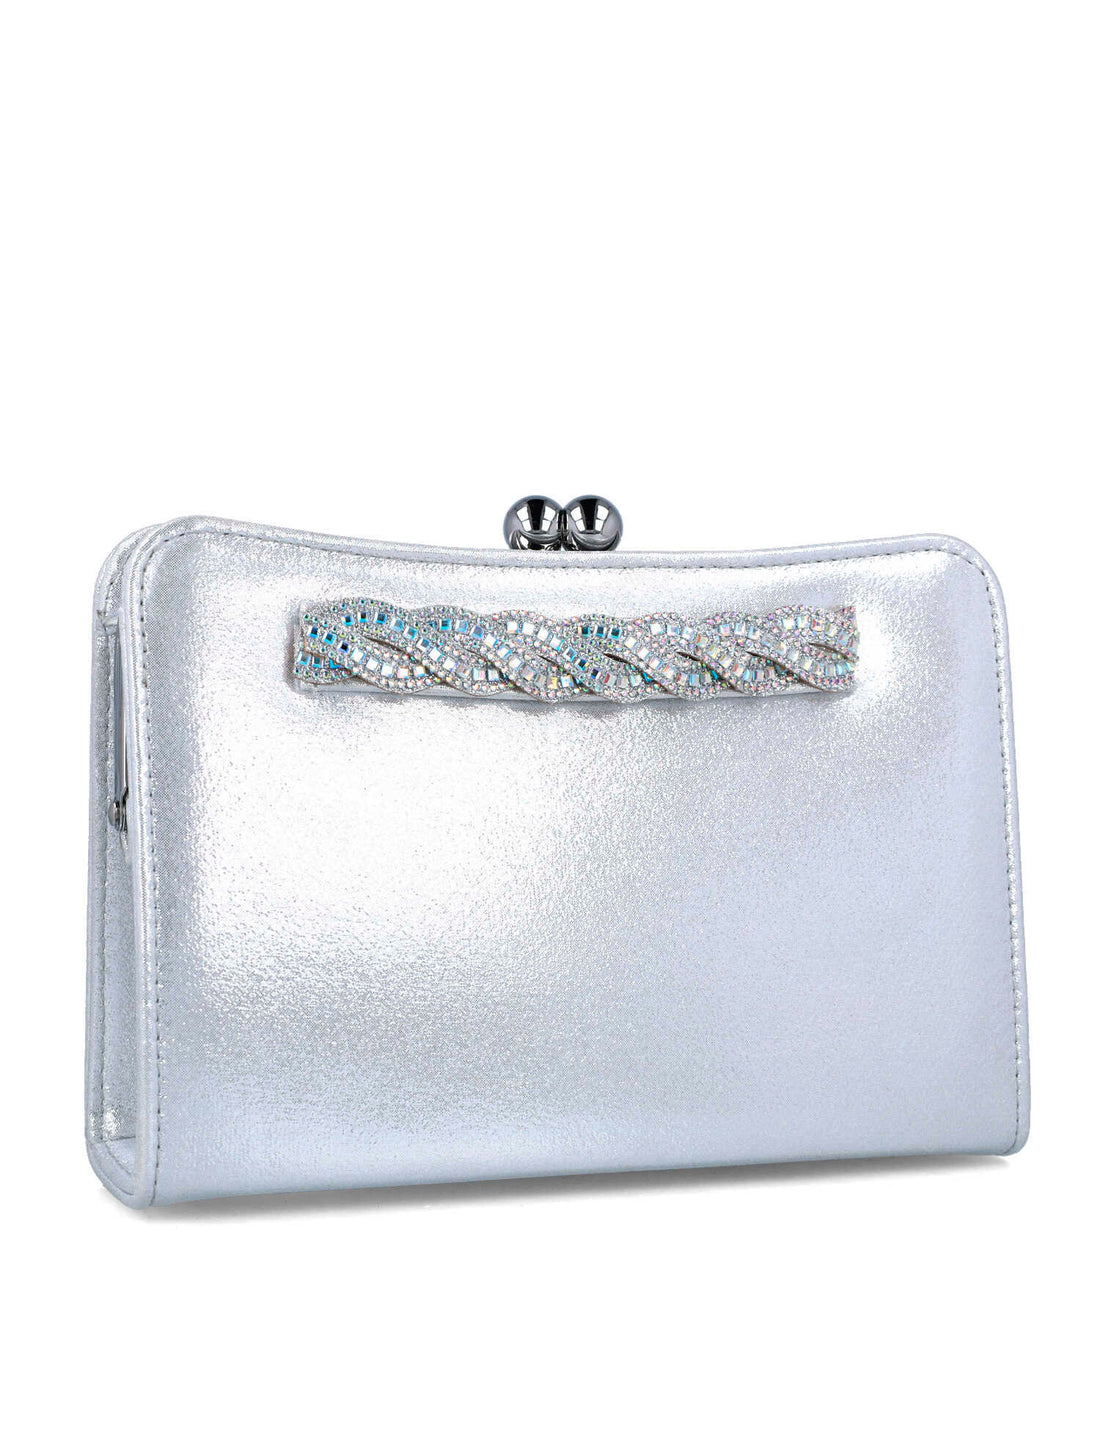 Silver Clutch With Embellished Hand Strap_85490_09_02